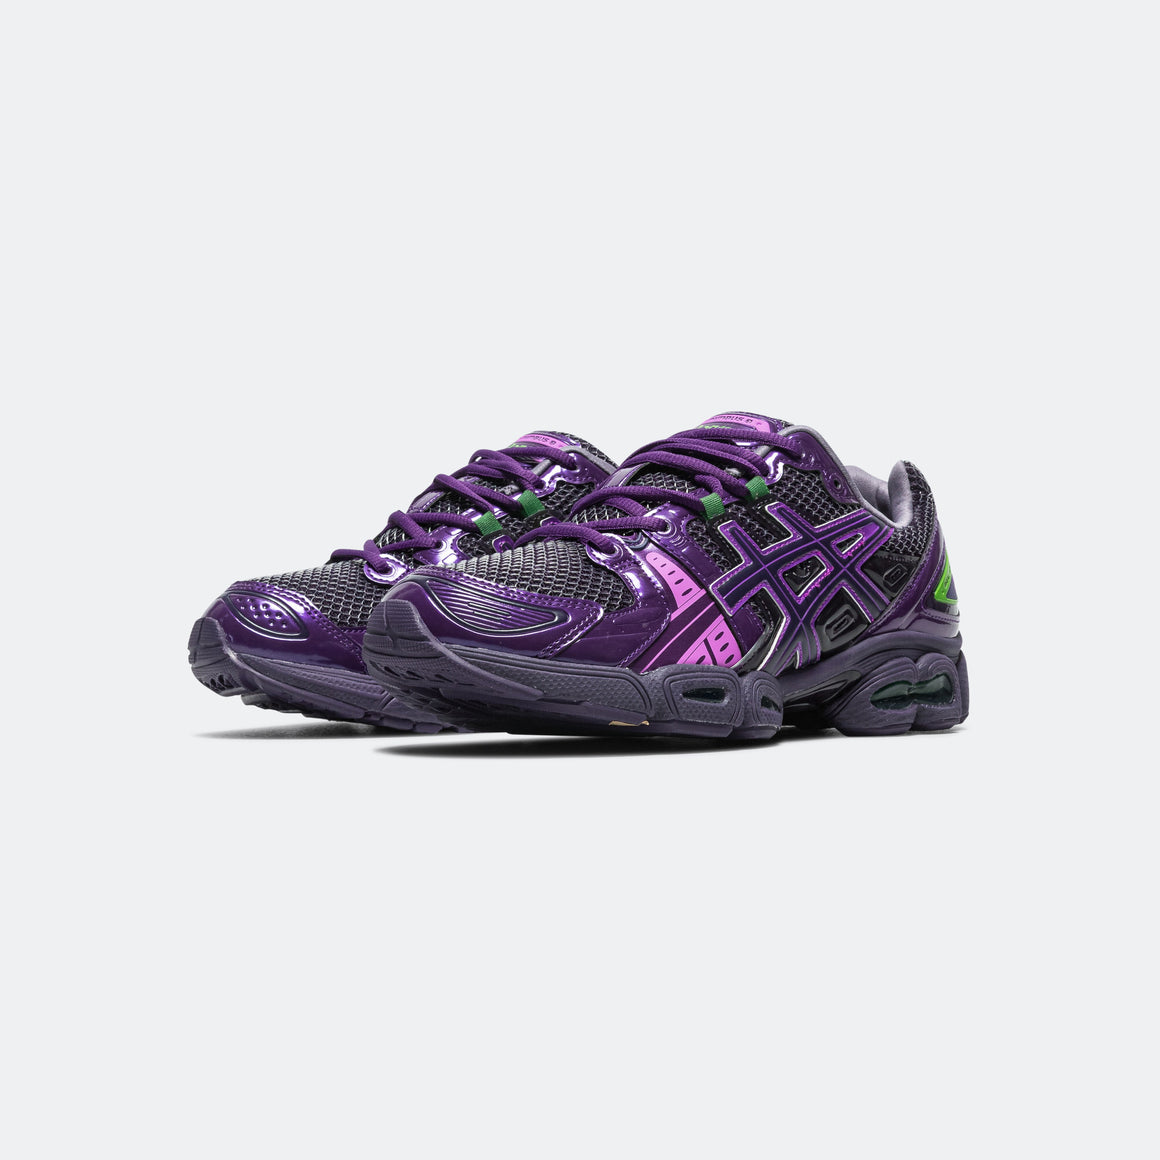 Asics - GEL-Nimbus 9 - Night Shade/Orchid - UP THERE